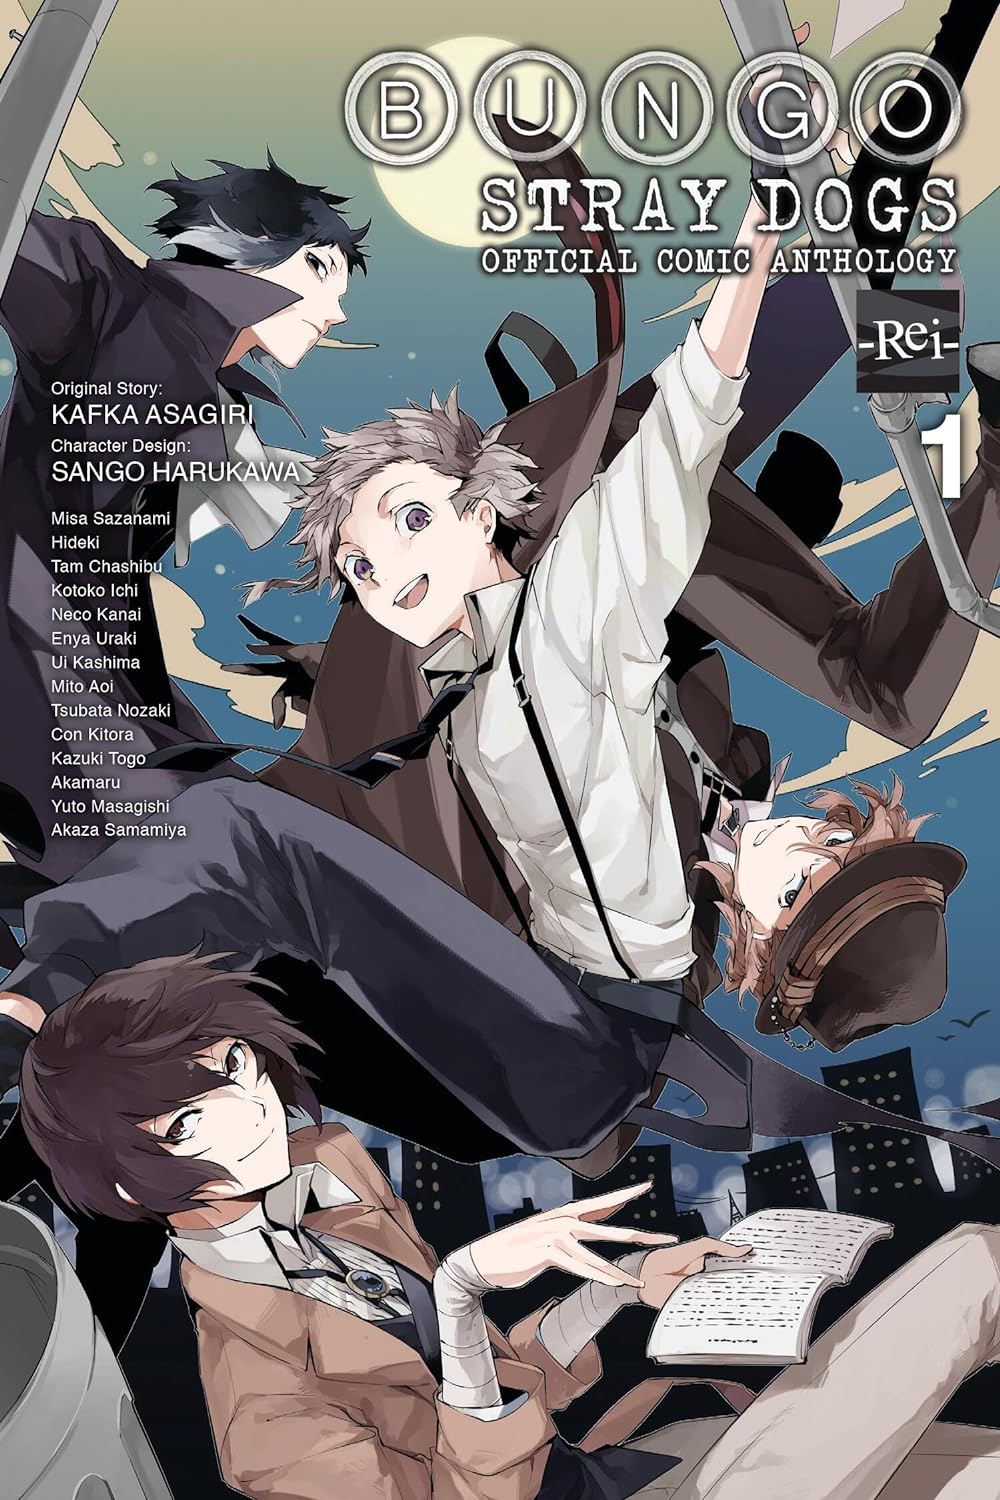 BUNGO STRAY DOGS OFFICIAL COMIC ANTHOLOGY GN VOL 01